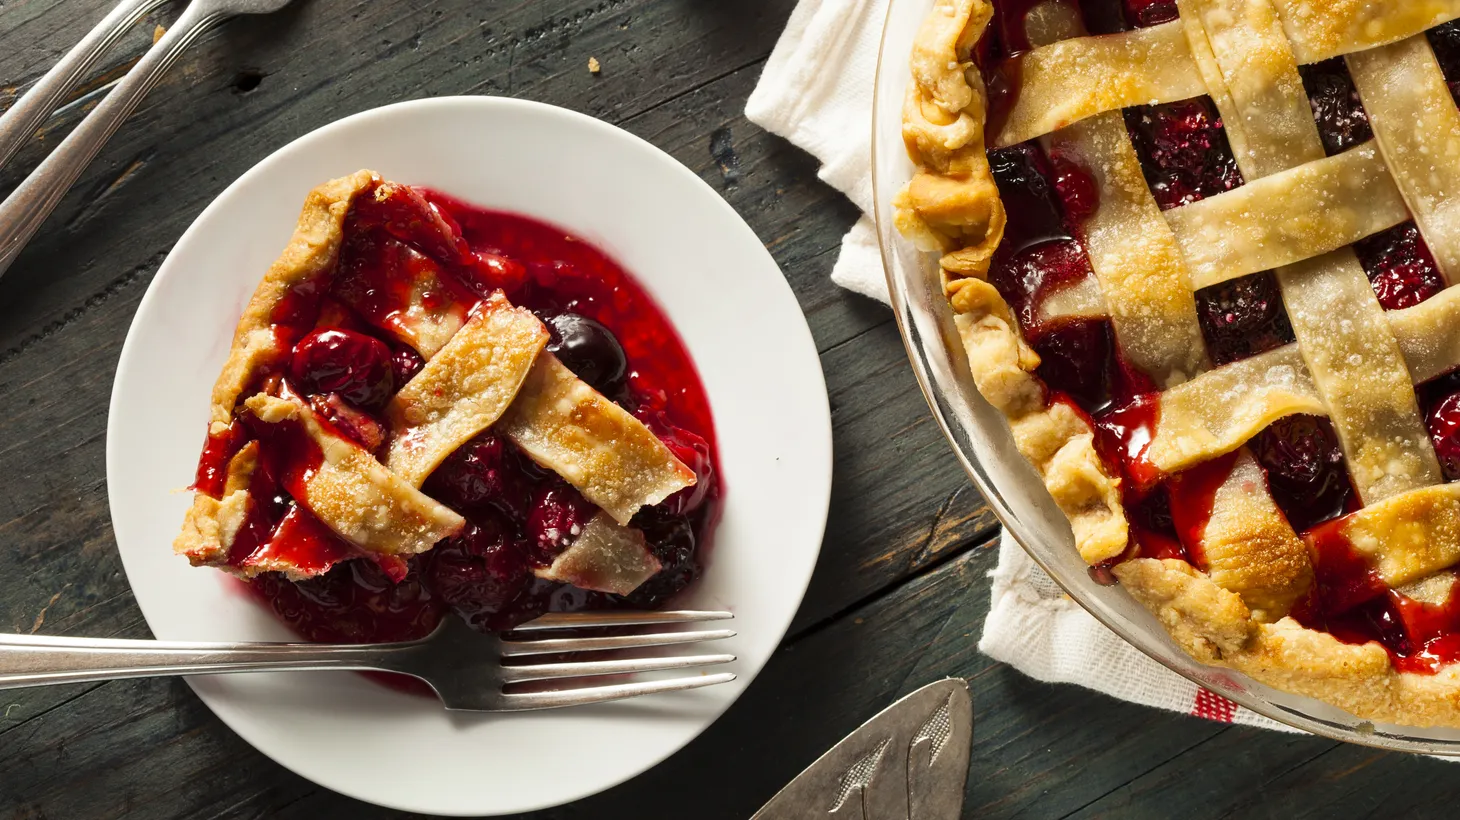 Fruit pies are the easiest to make vegan.